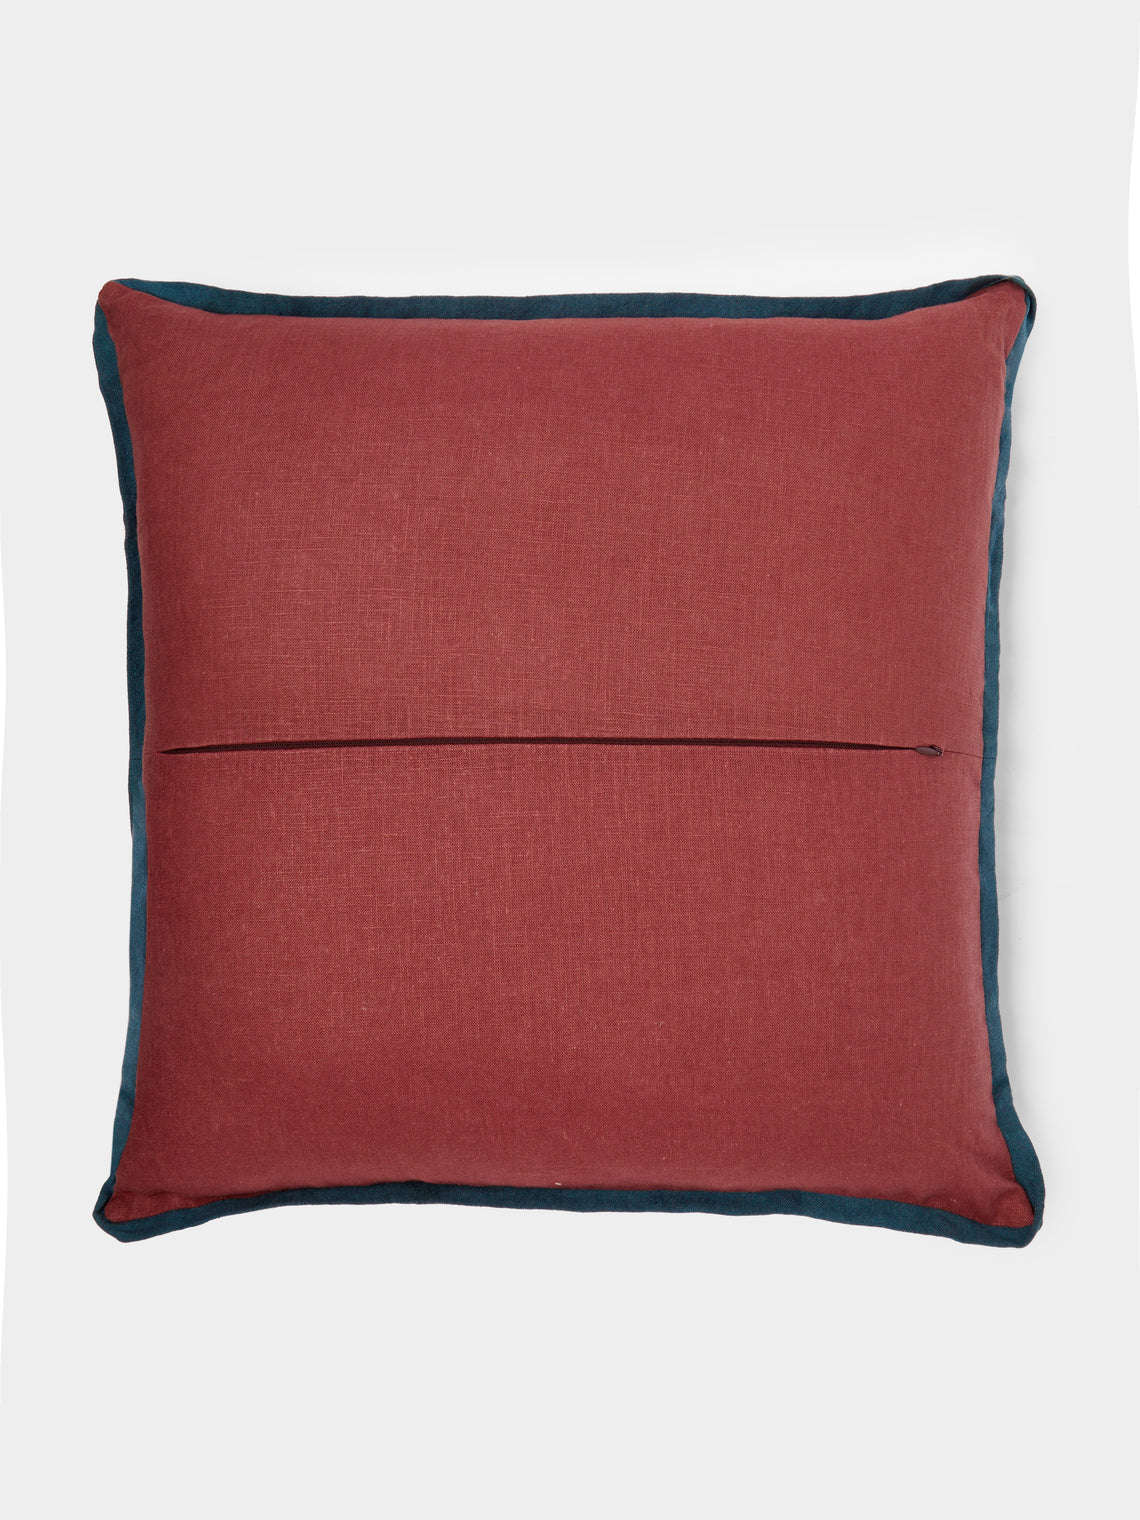 Rosemary Milner - Seaweed Hand-Embroidered Cotton Cushion -  - ABASK